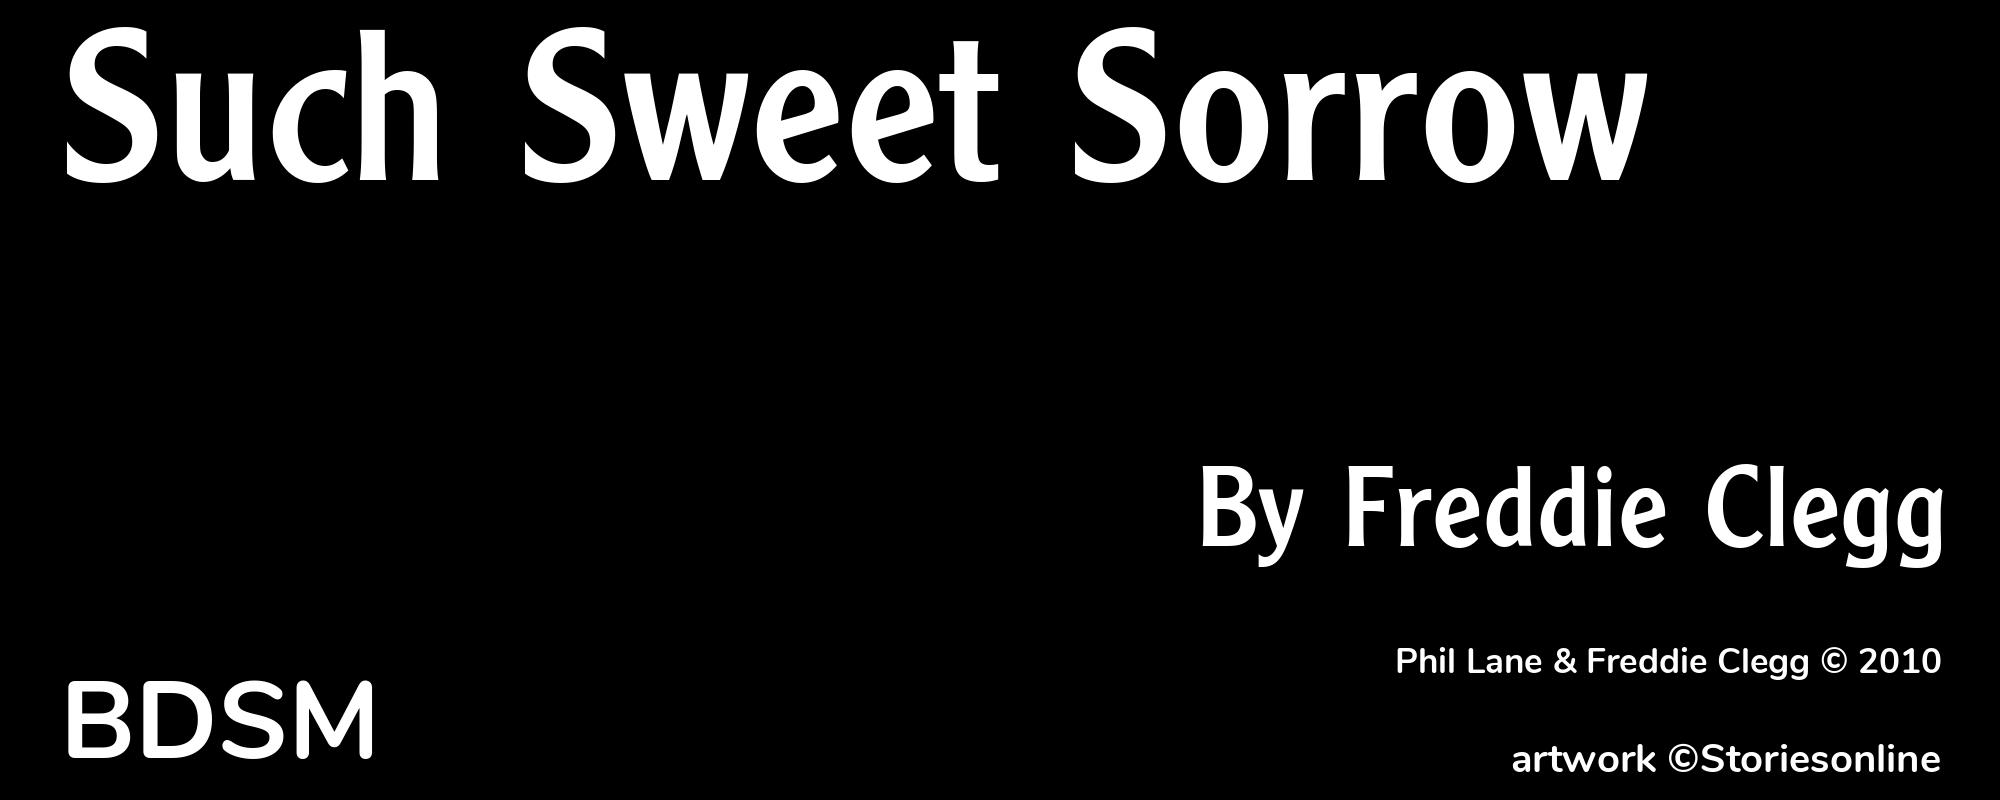 Such Sweet Sorrow - Cover